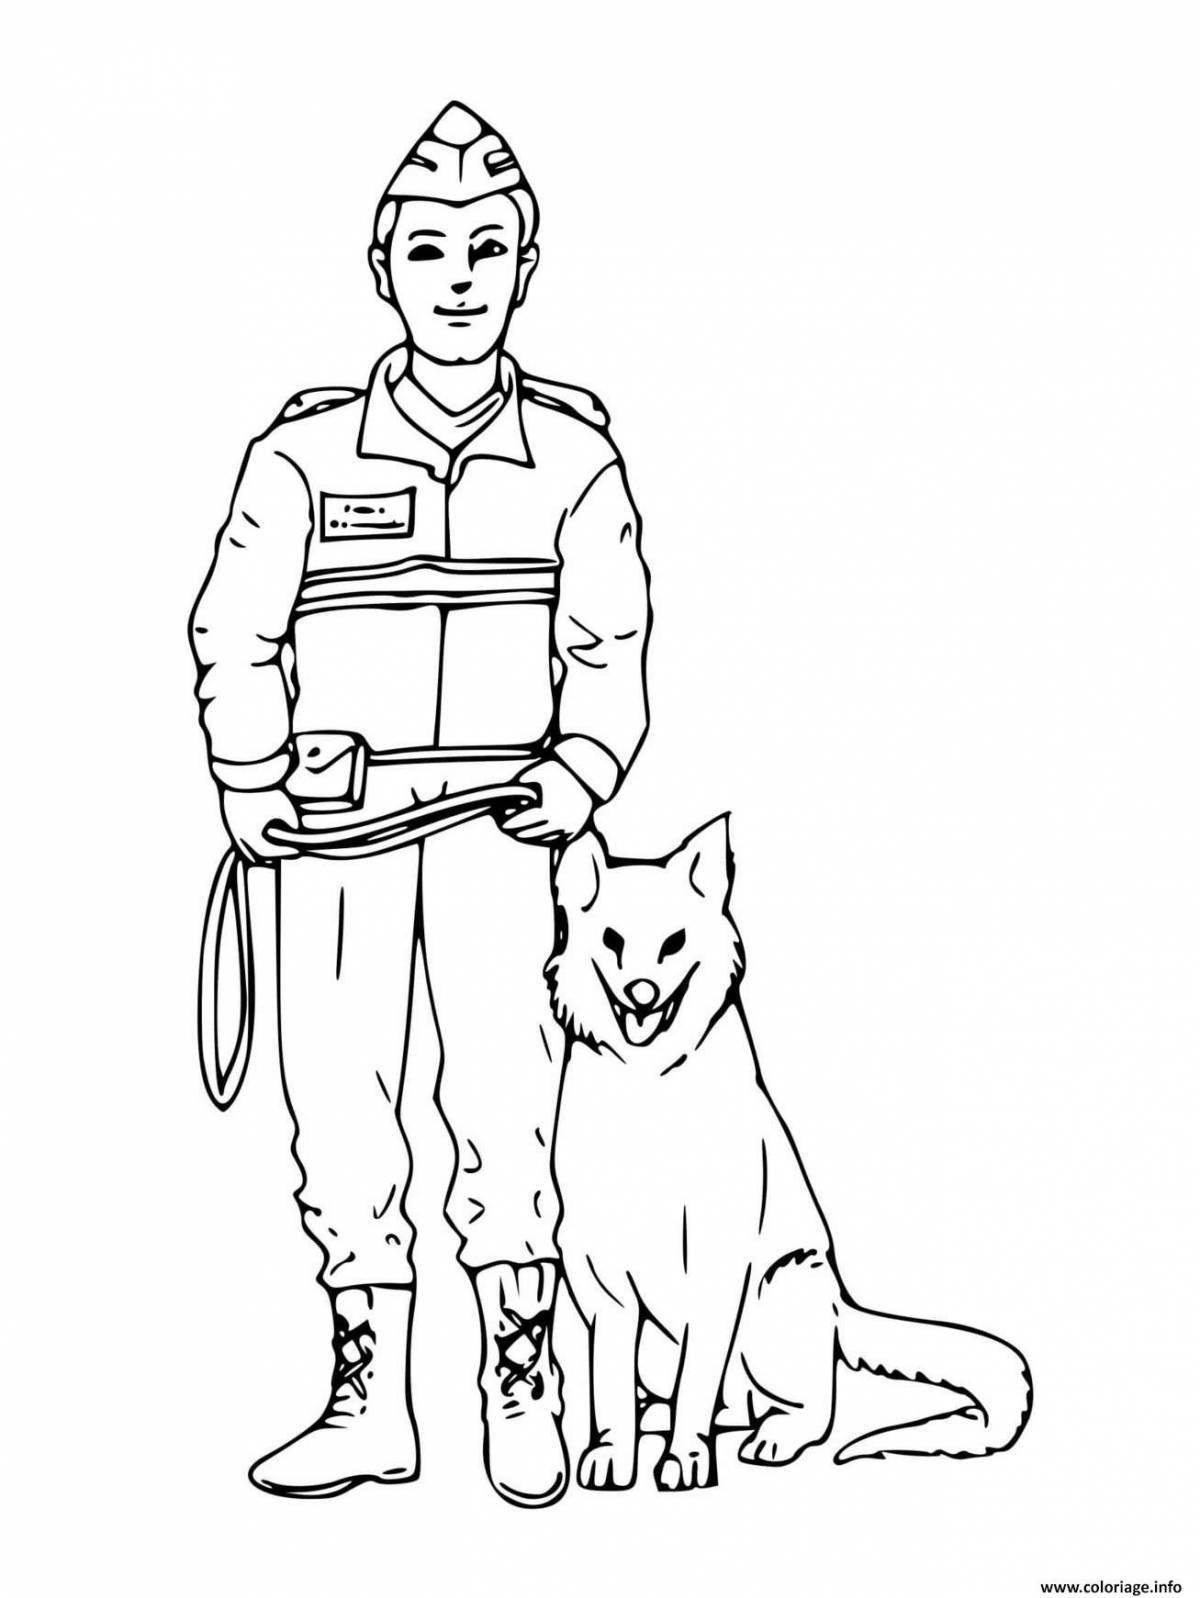 A fascinating coloring book for children about the military profession